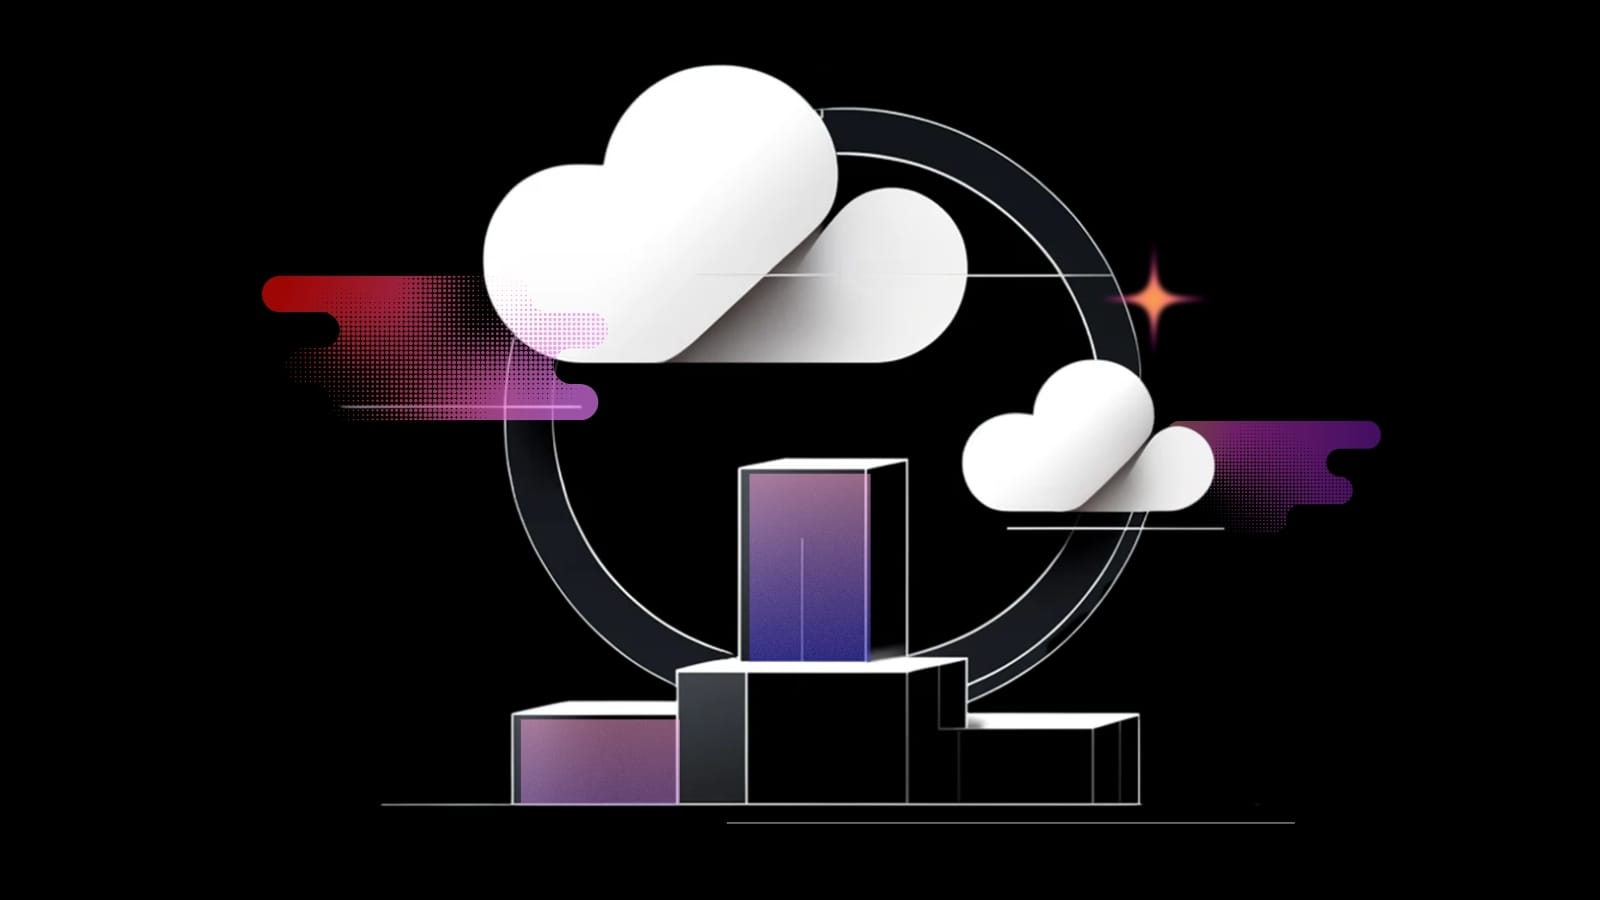 Abstract design with geometric shapes, white clouds, and colorful gradients on a black background, suggesting a futuristic am